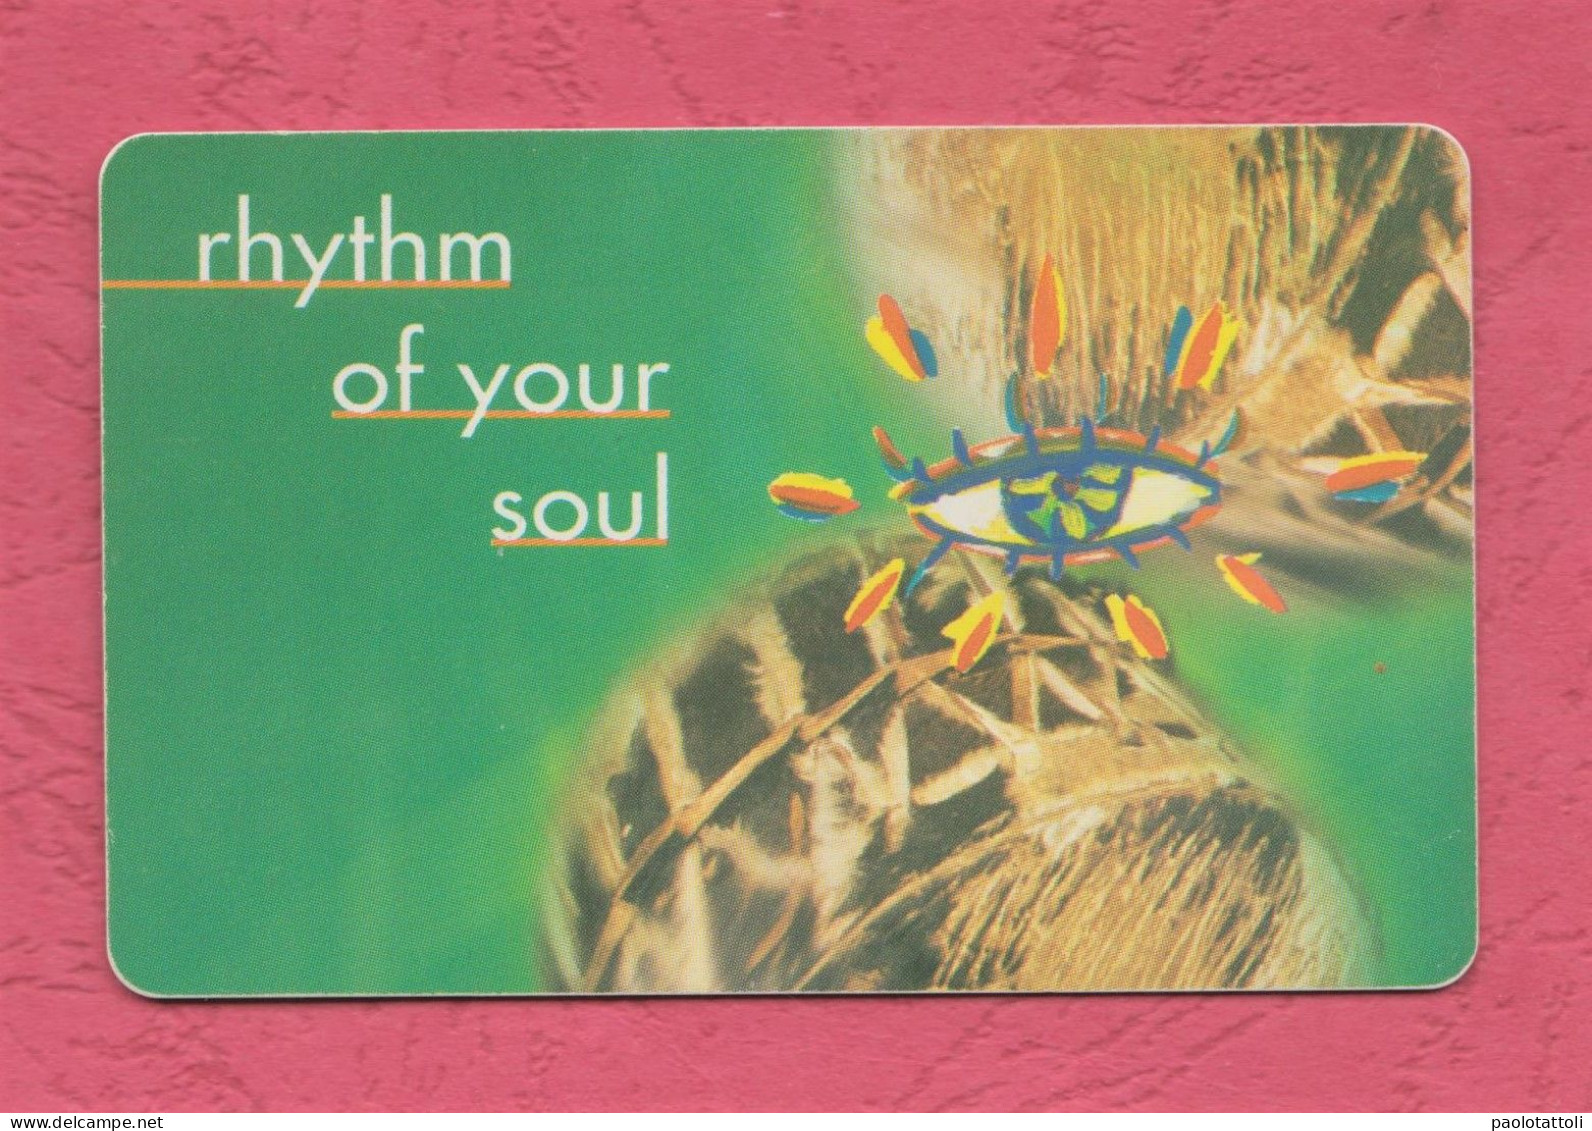 South Africa, Sud Africa- Used Phone Card With Chip By 20R, Telekom. -rhytm Of Your Soul- Exp. Date 8.1999- - South Africa